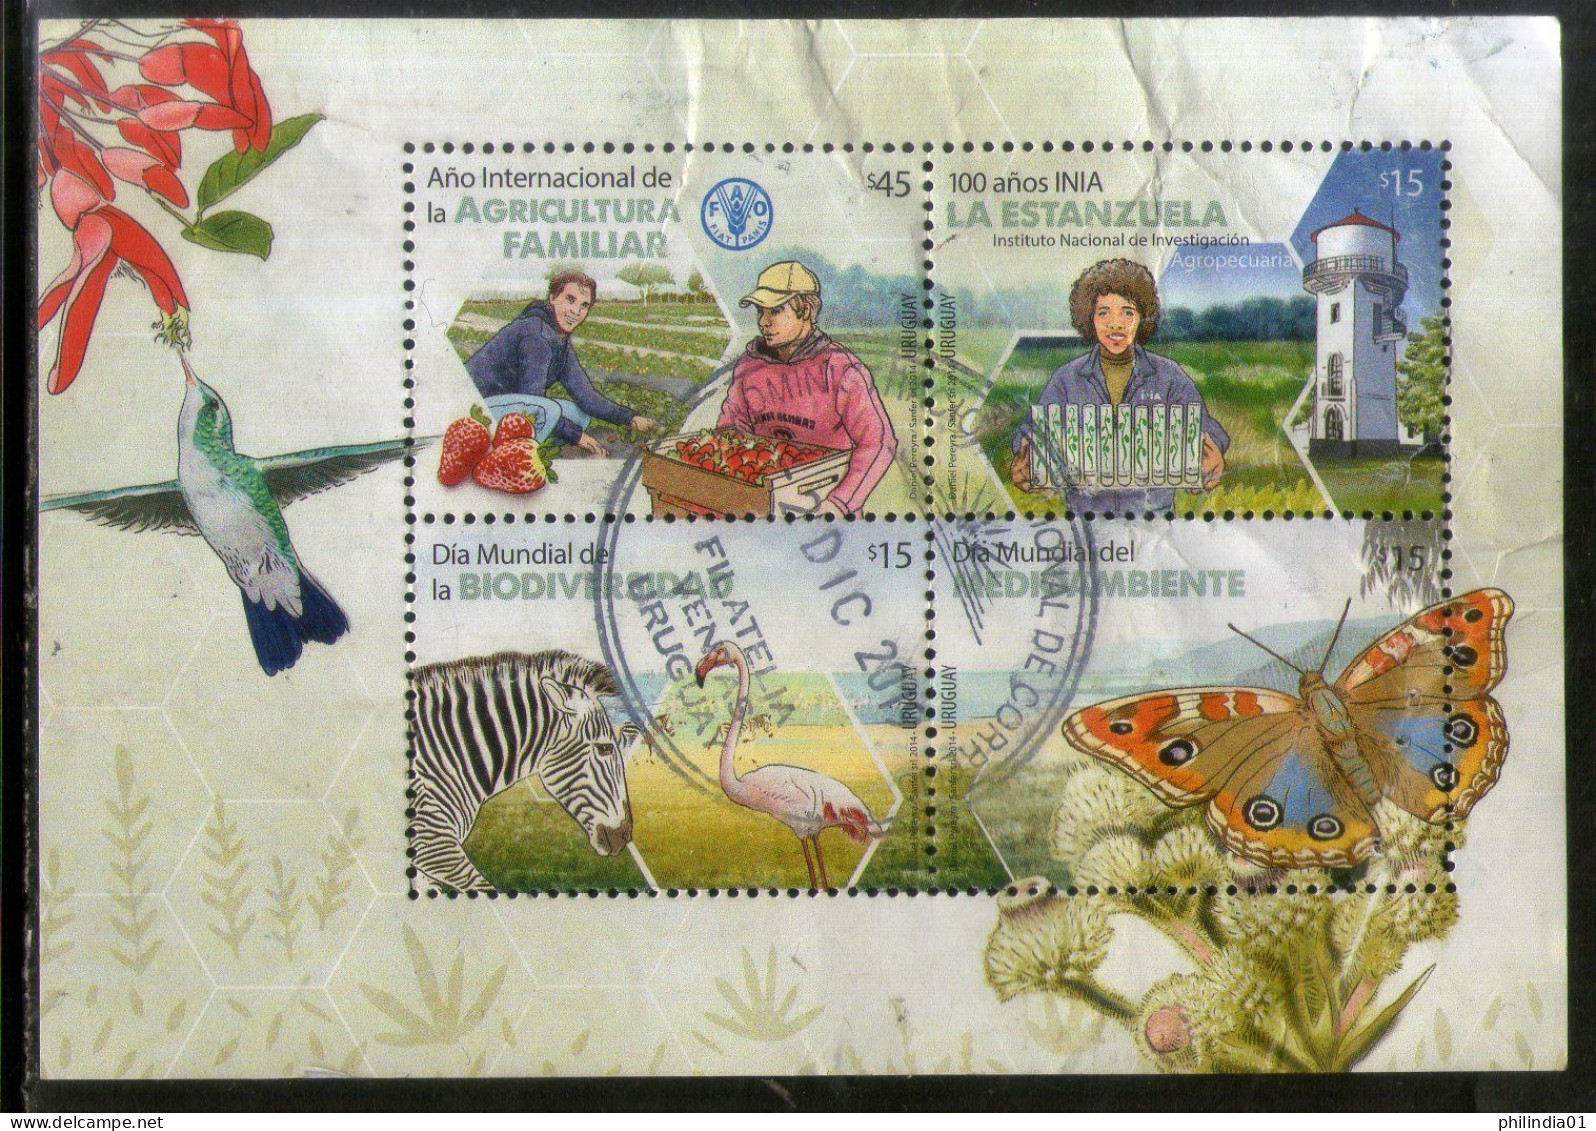 Uruguay 2014 Agriculture Biodiversity Animals Butterfly Bird Used M/s # 7641A - Agricoltura